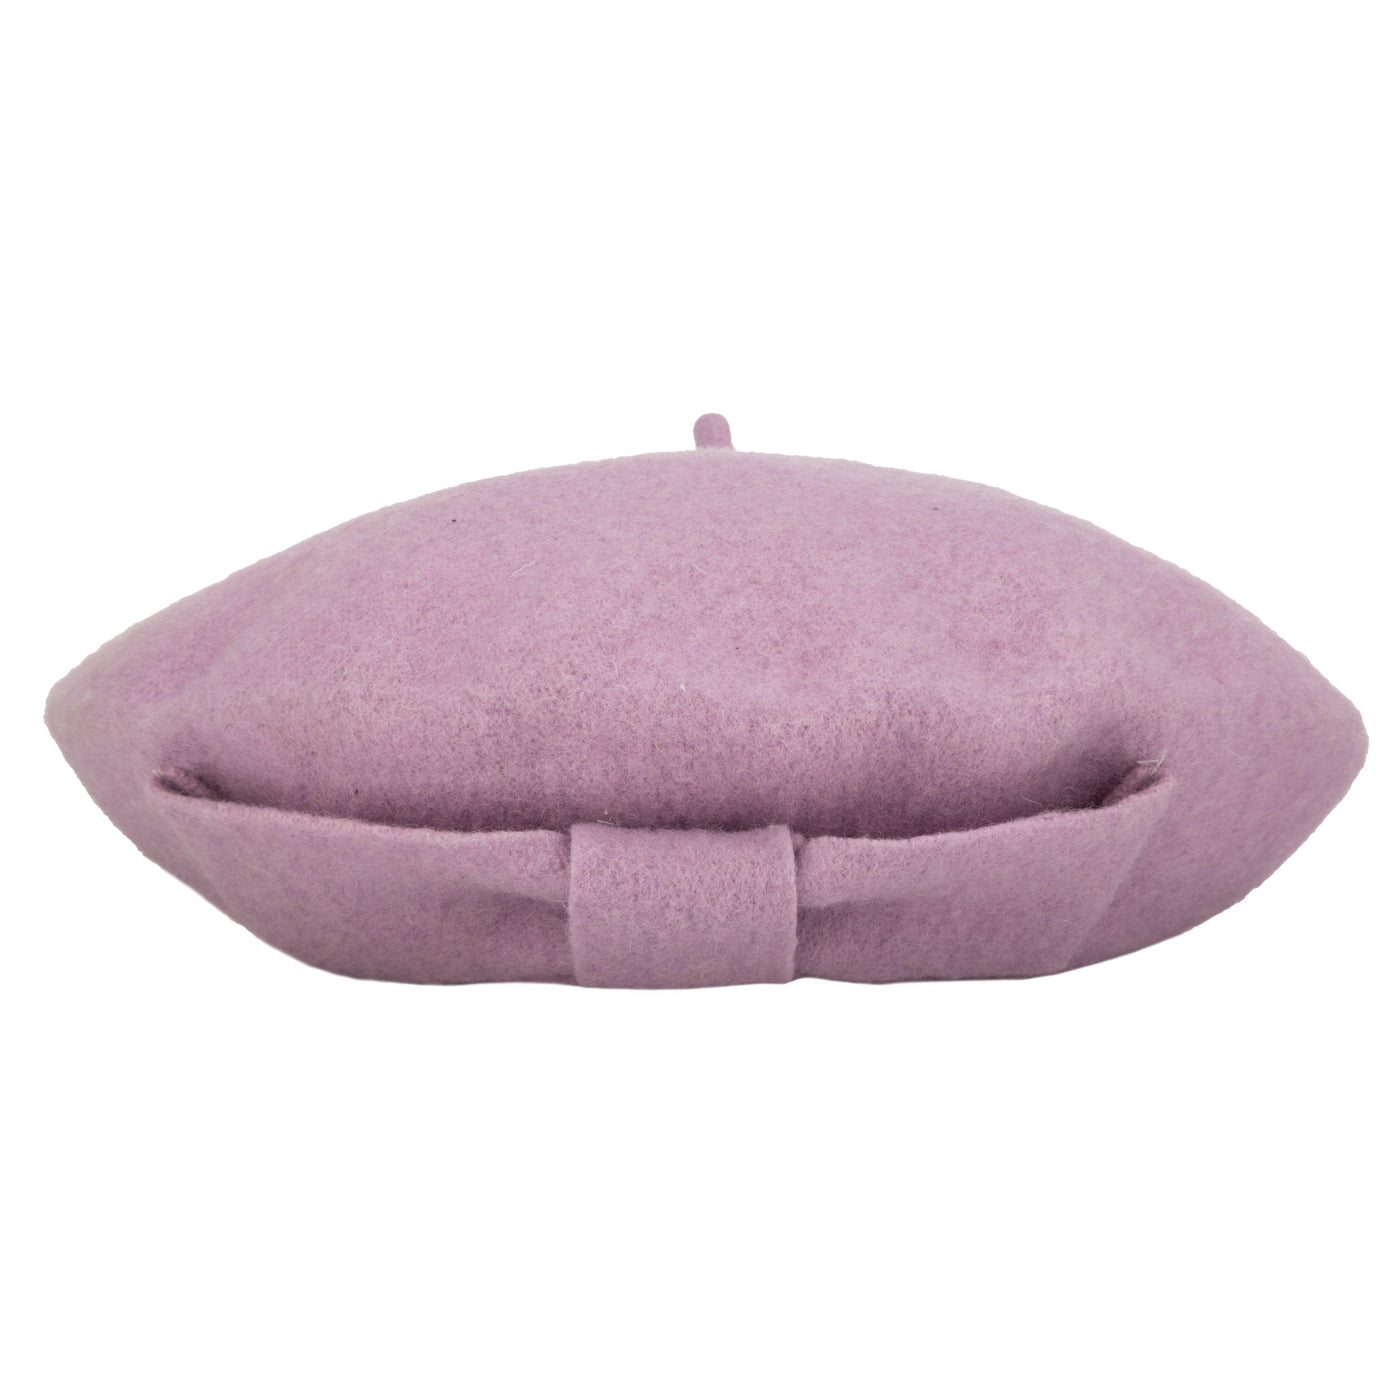 BERET - Carrie Bow Beret